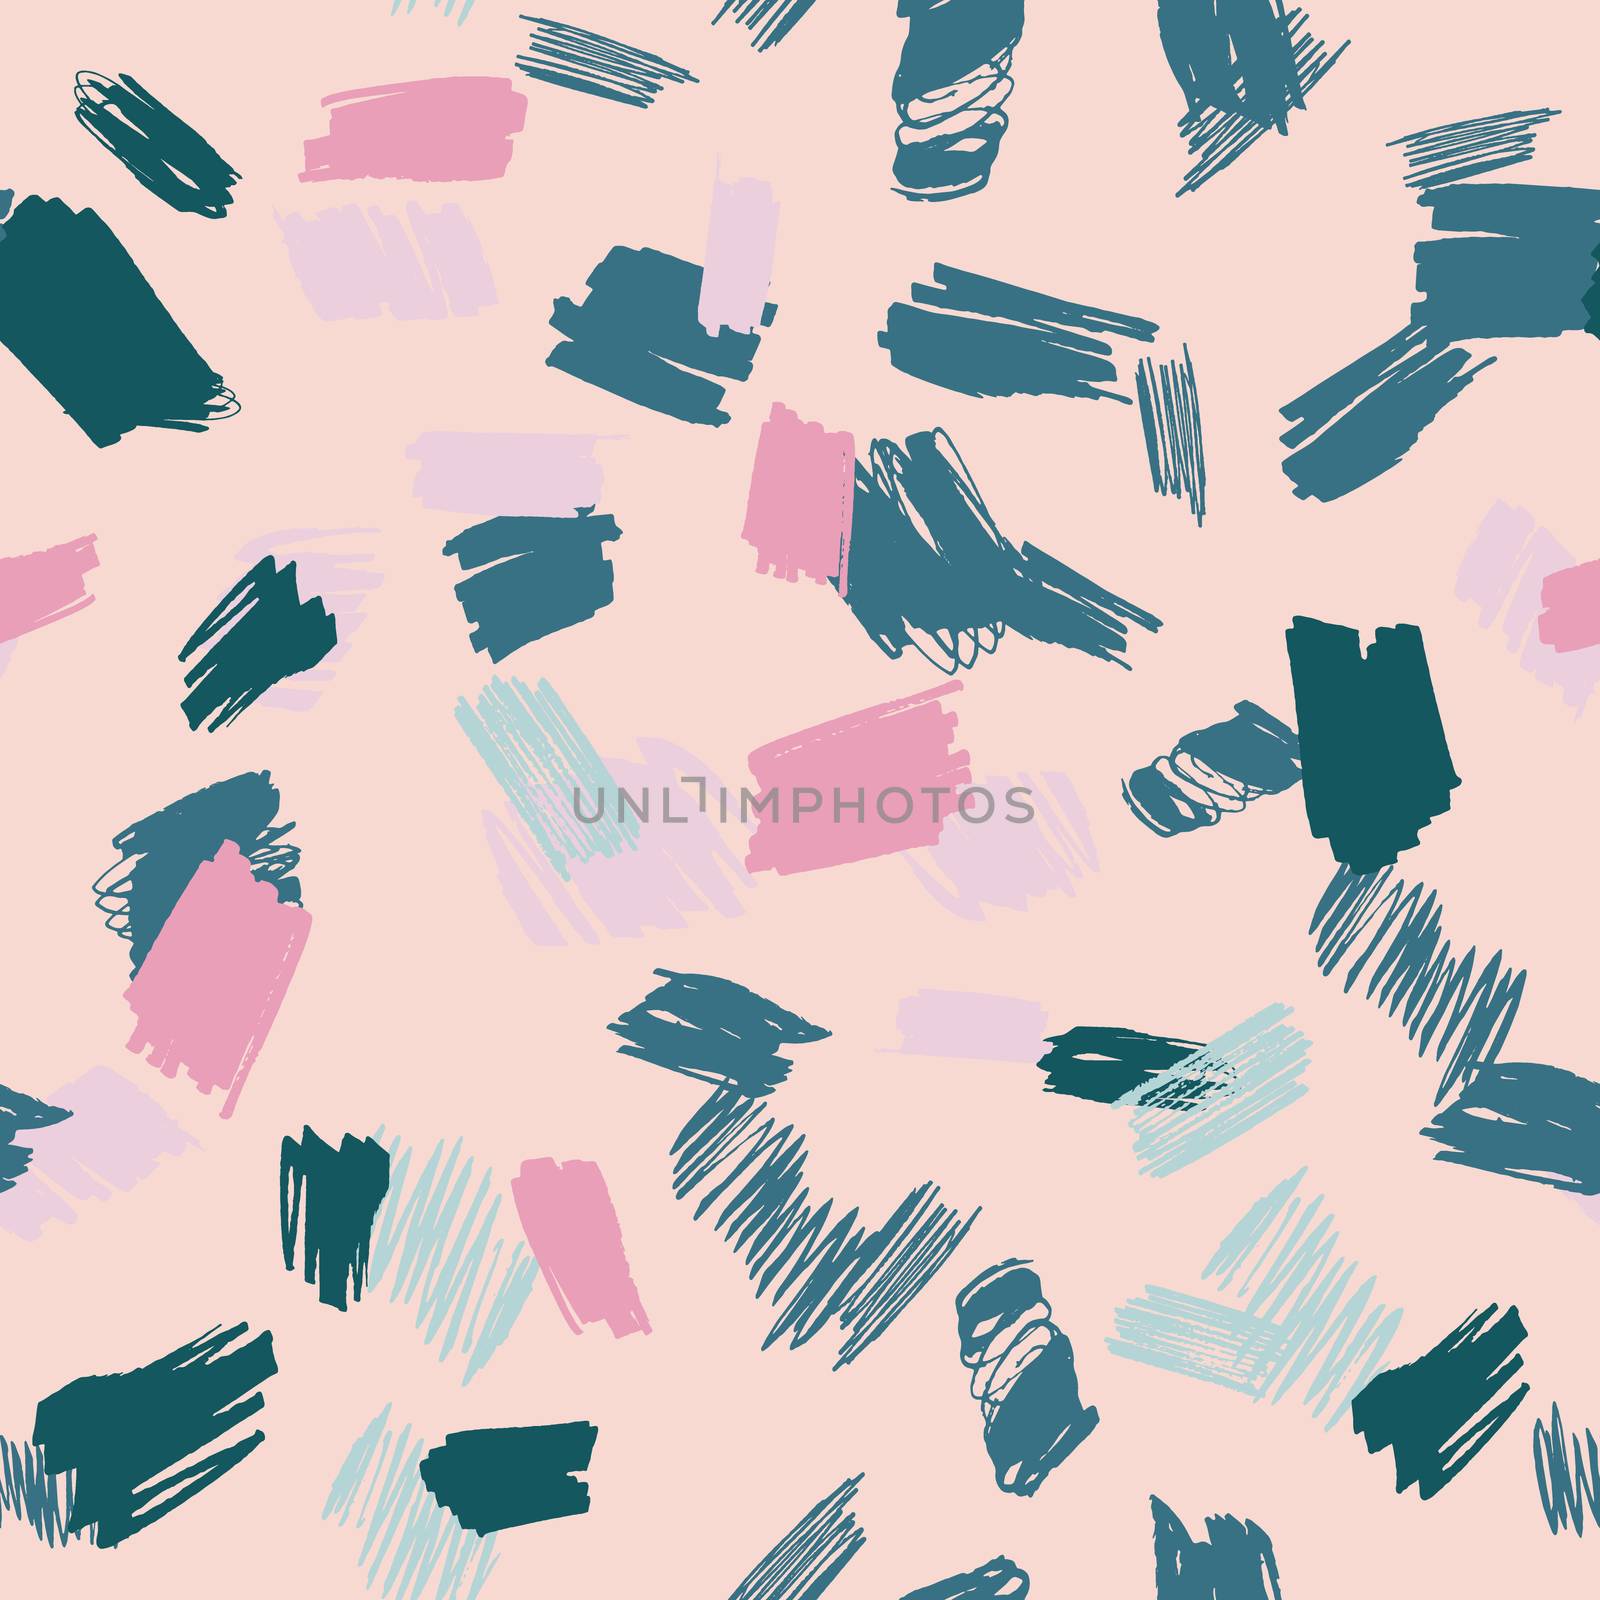 Abstract pink and teal seamless pattern with hand drawn textures, colorful background. by Nata_Prando